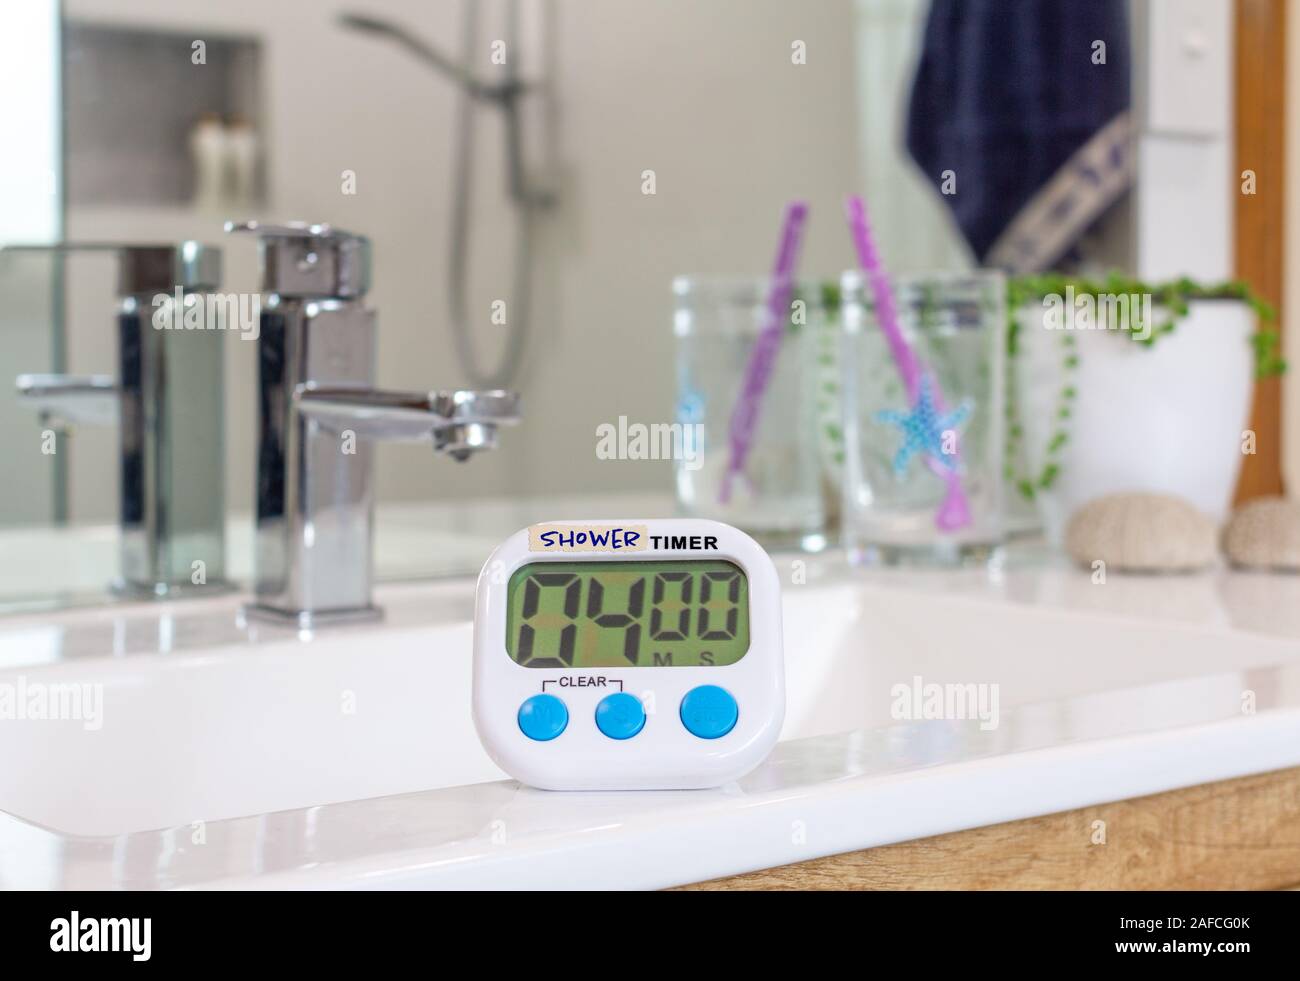 https://c8.alamy.com/comp/2AFCG0K/homemade-shower-timer-in-bathroom-used-to-time-showers-due-to-water-restrictions-caused-by-drought-conditions-through-climate-change-2AFCG0K.jpg